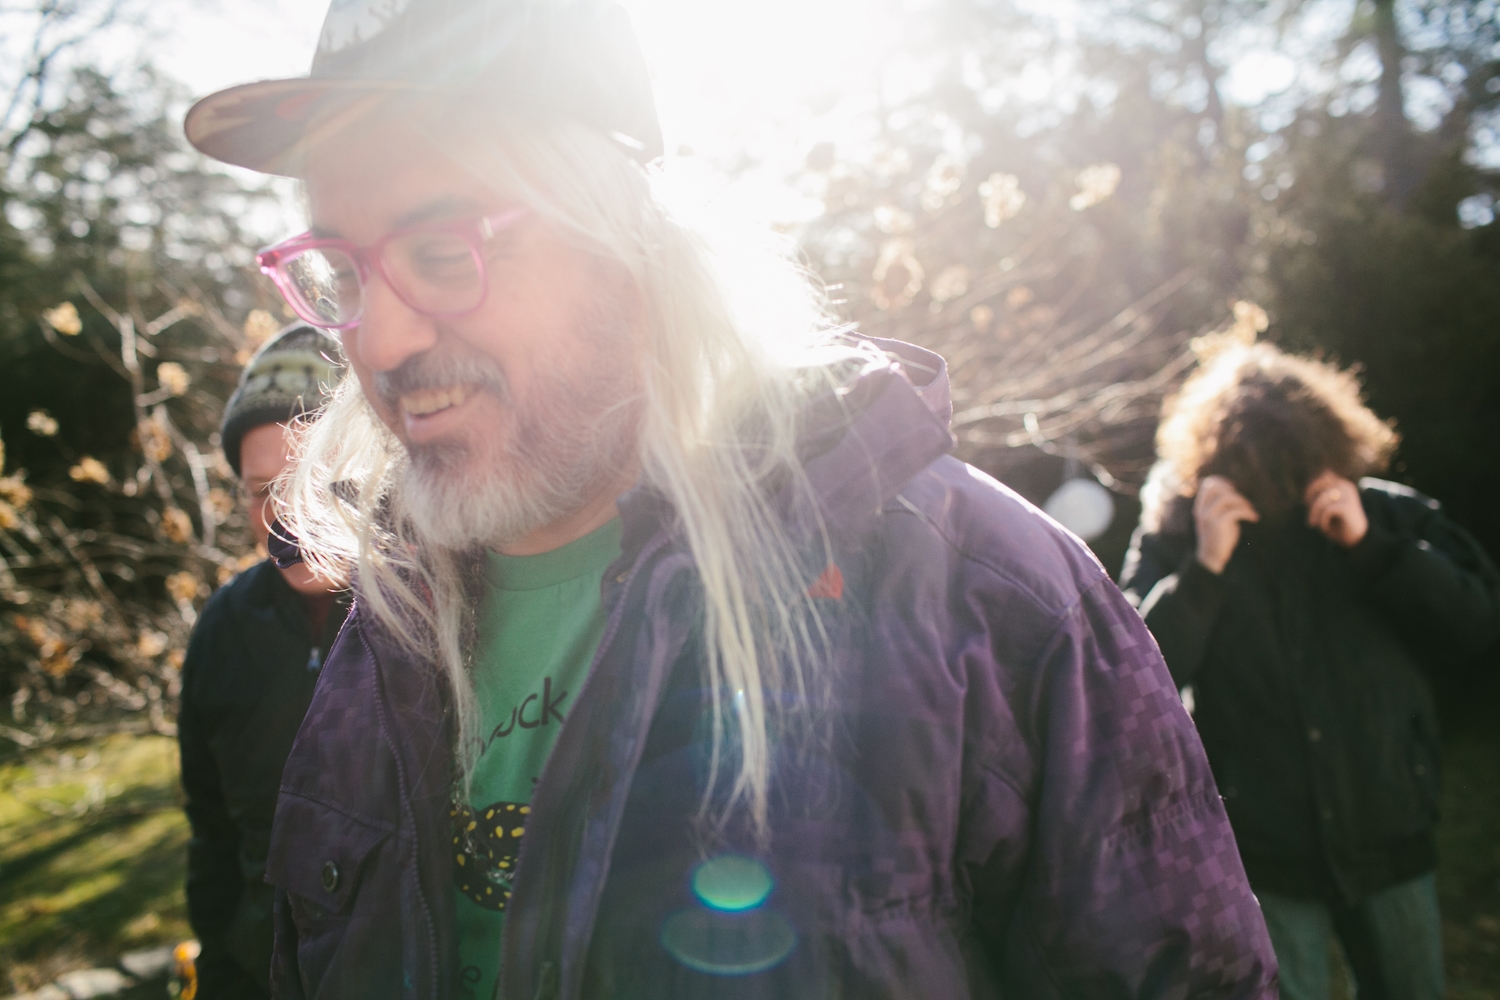 Dinosaur Jr. are going on a UK tour, with Cloud Nothings supporting at London show